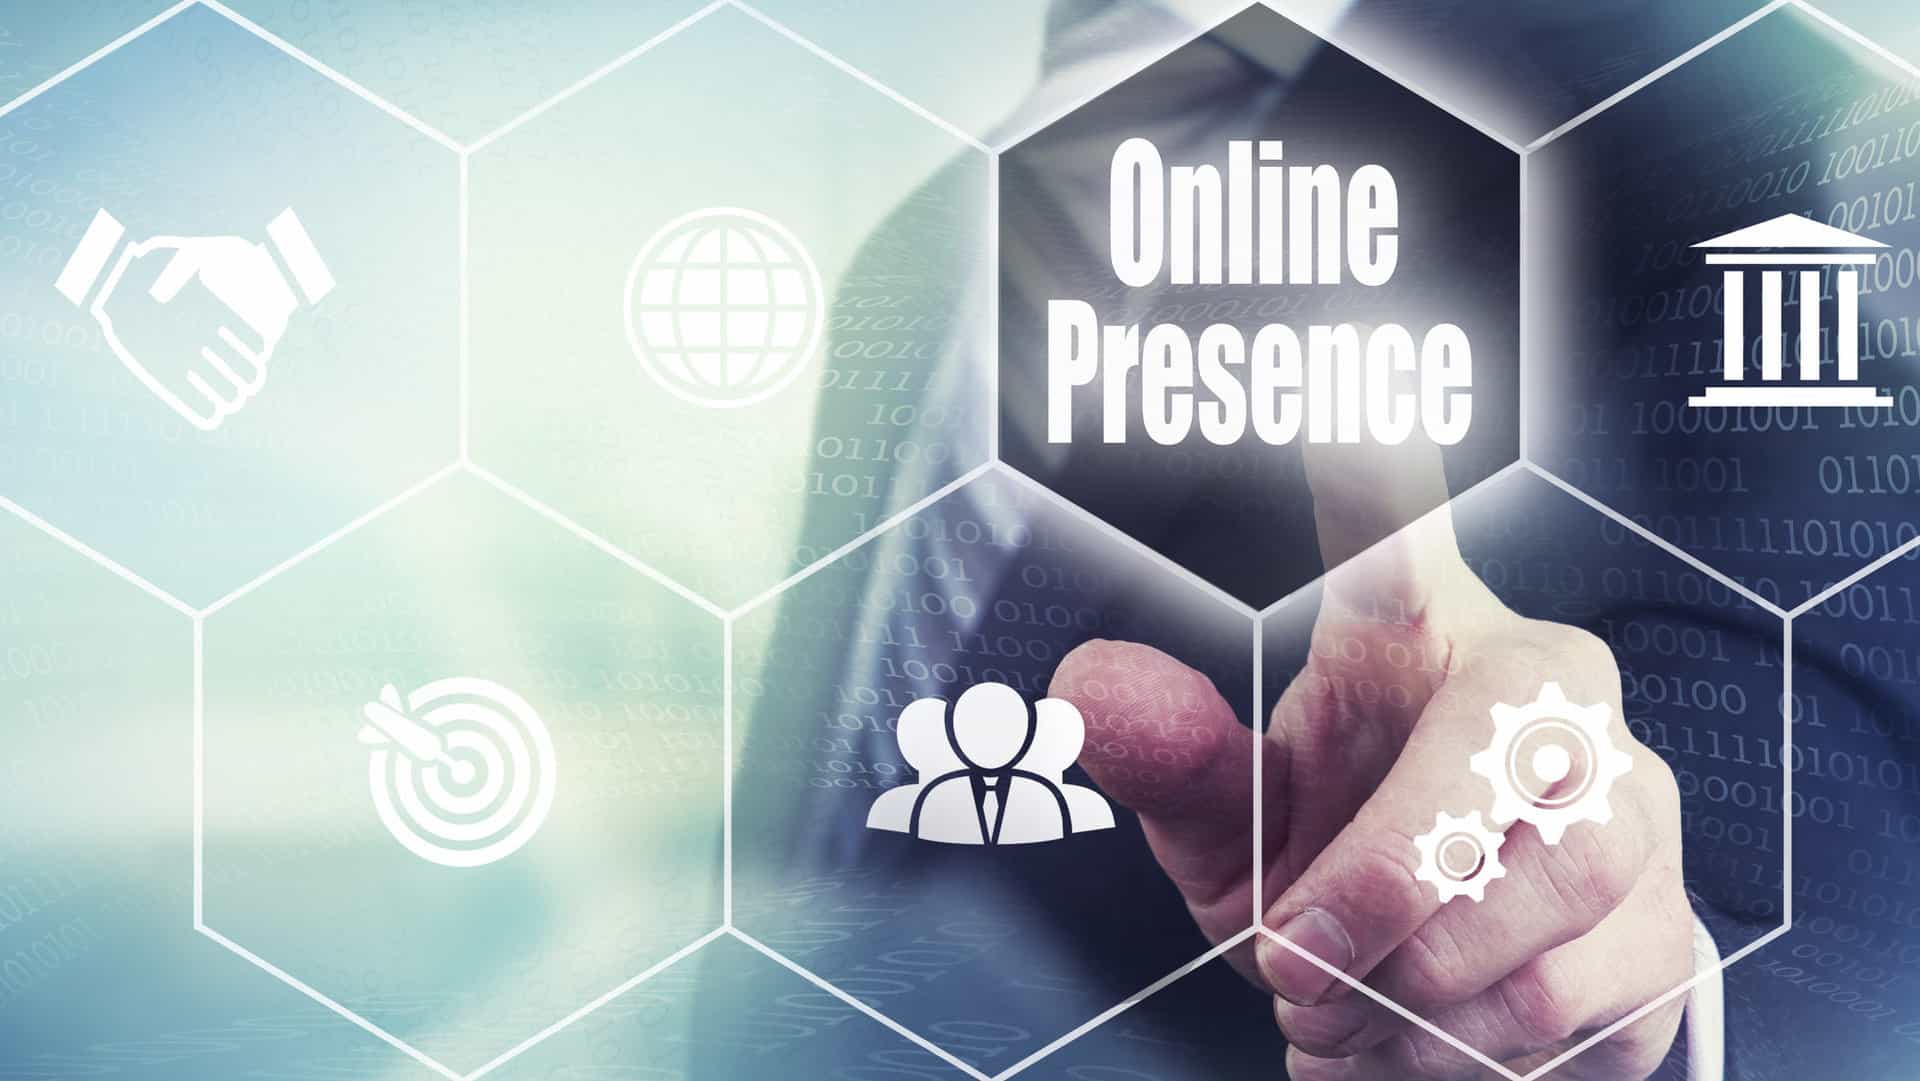 12 Effective Ways to Improve Your Business's Online Presence in 2021